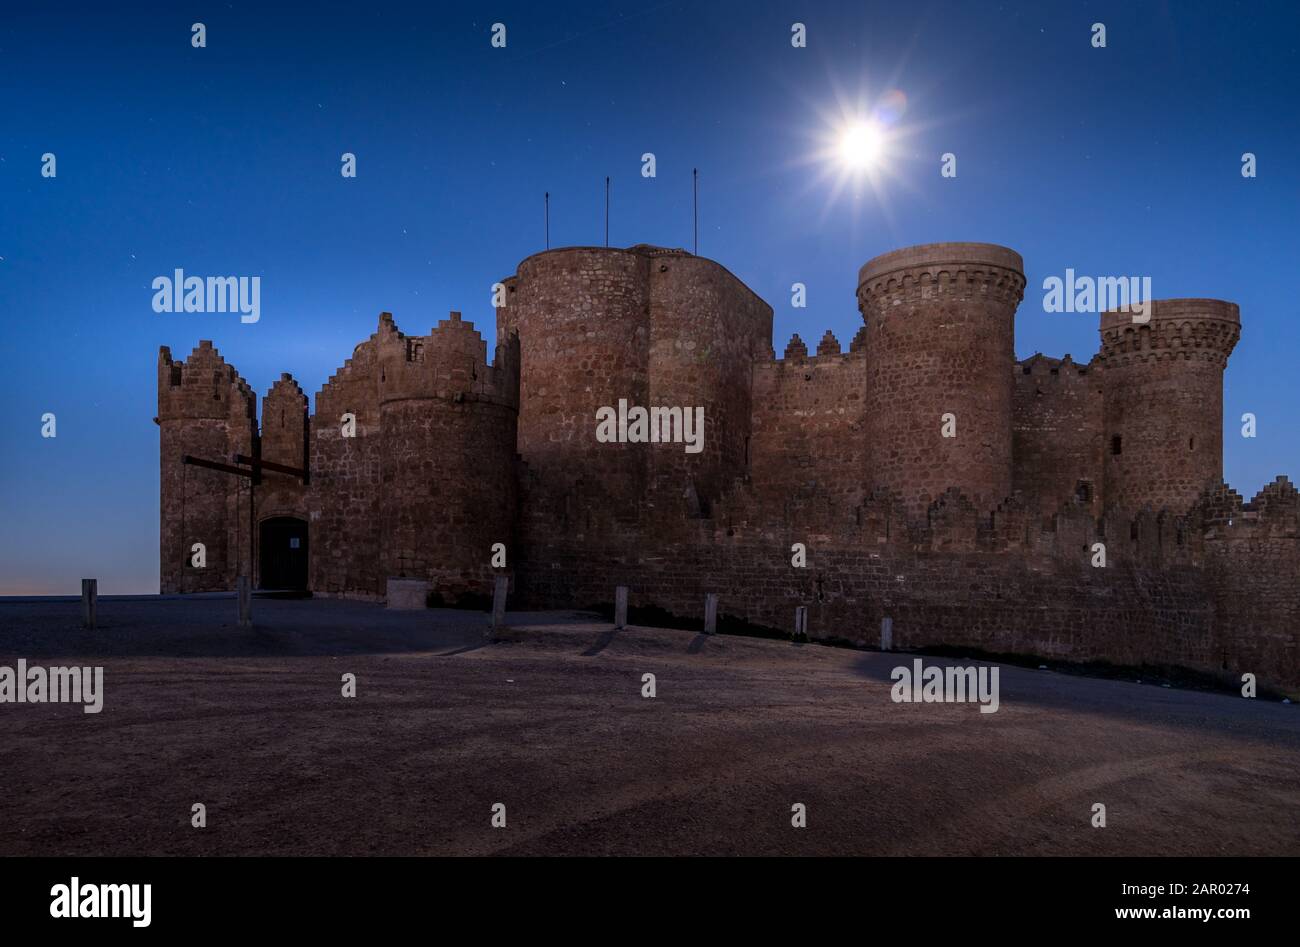 Night view of Belmonte castle in Cuenca province Spain with long stretching city walls topped with battlements Stock Photo